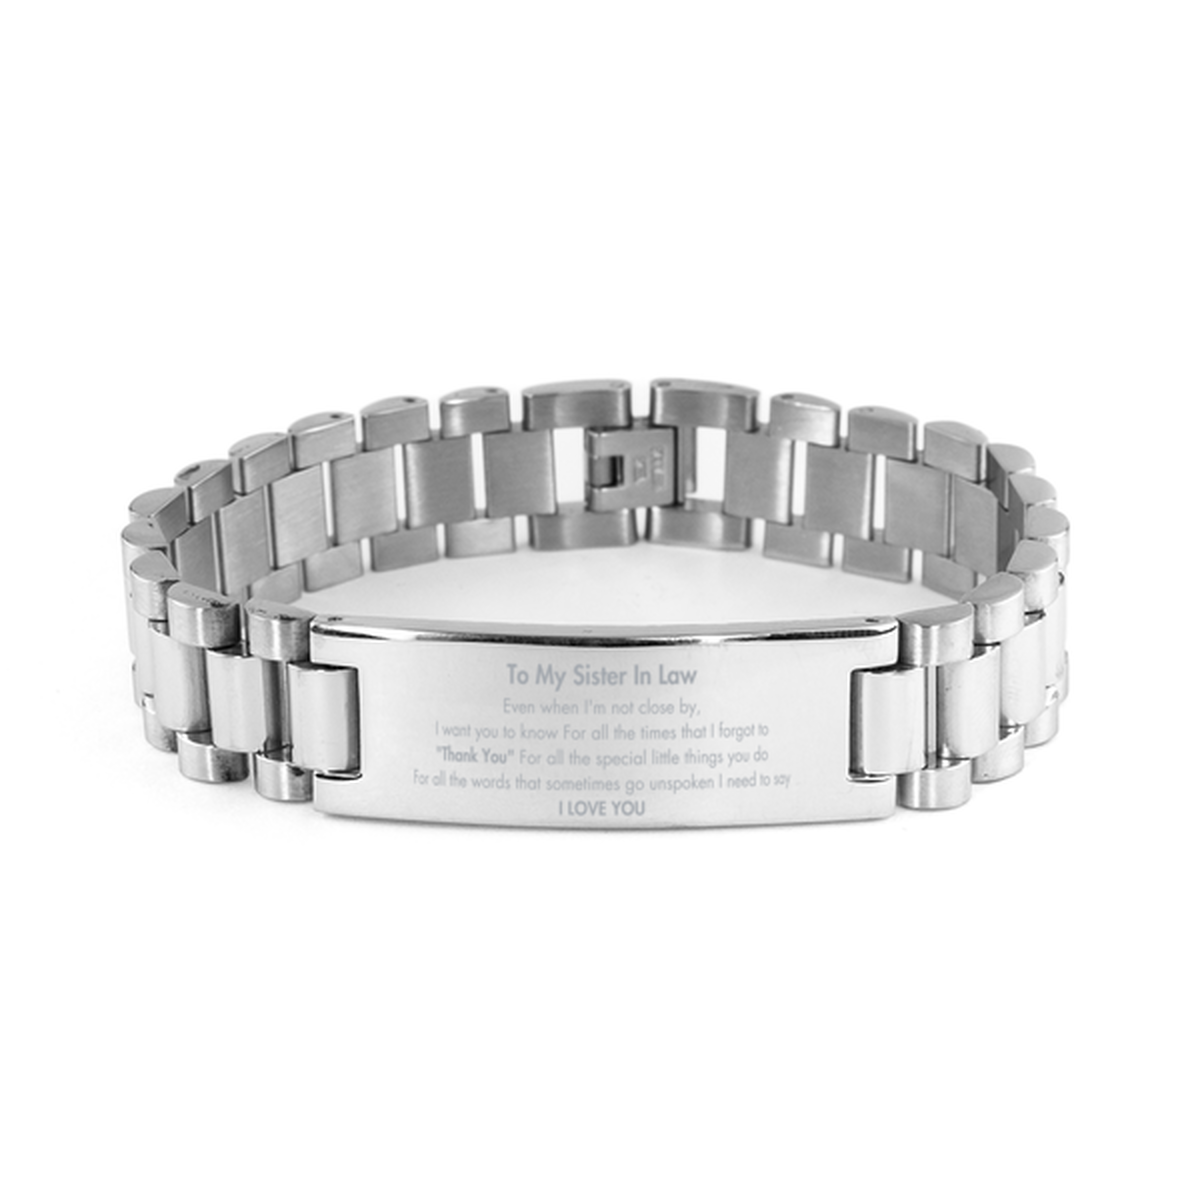 Thank You Gifts for Sister In Law, Keepsake Ladder Stainless Steel Bracelet Gifts for Sister In Law Birthday Mother's day Father's Day Sister In Law For all the words That sometimes go unspoken I need to say I LOVE YOU